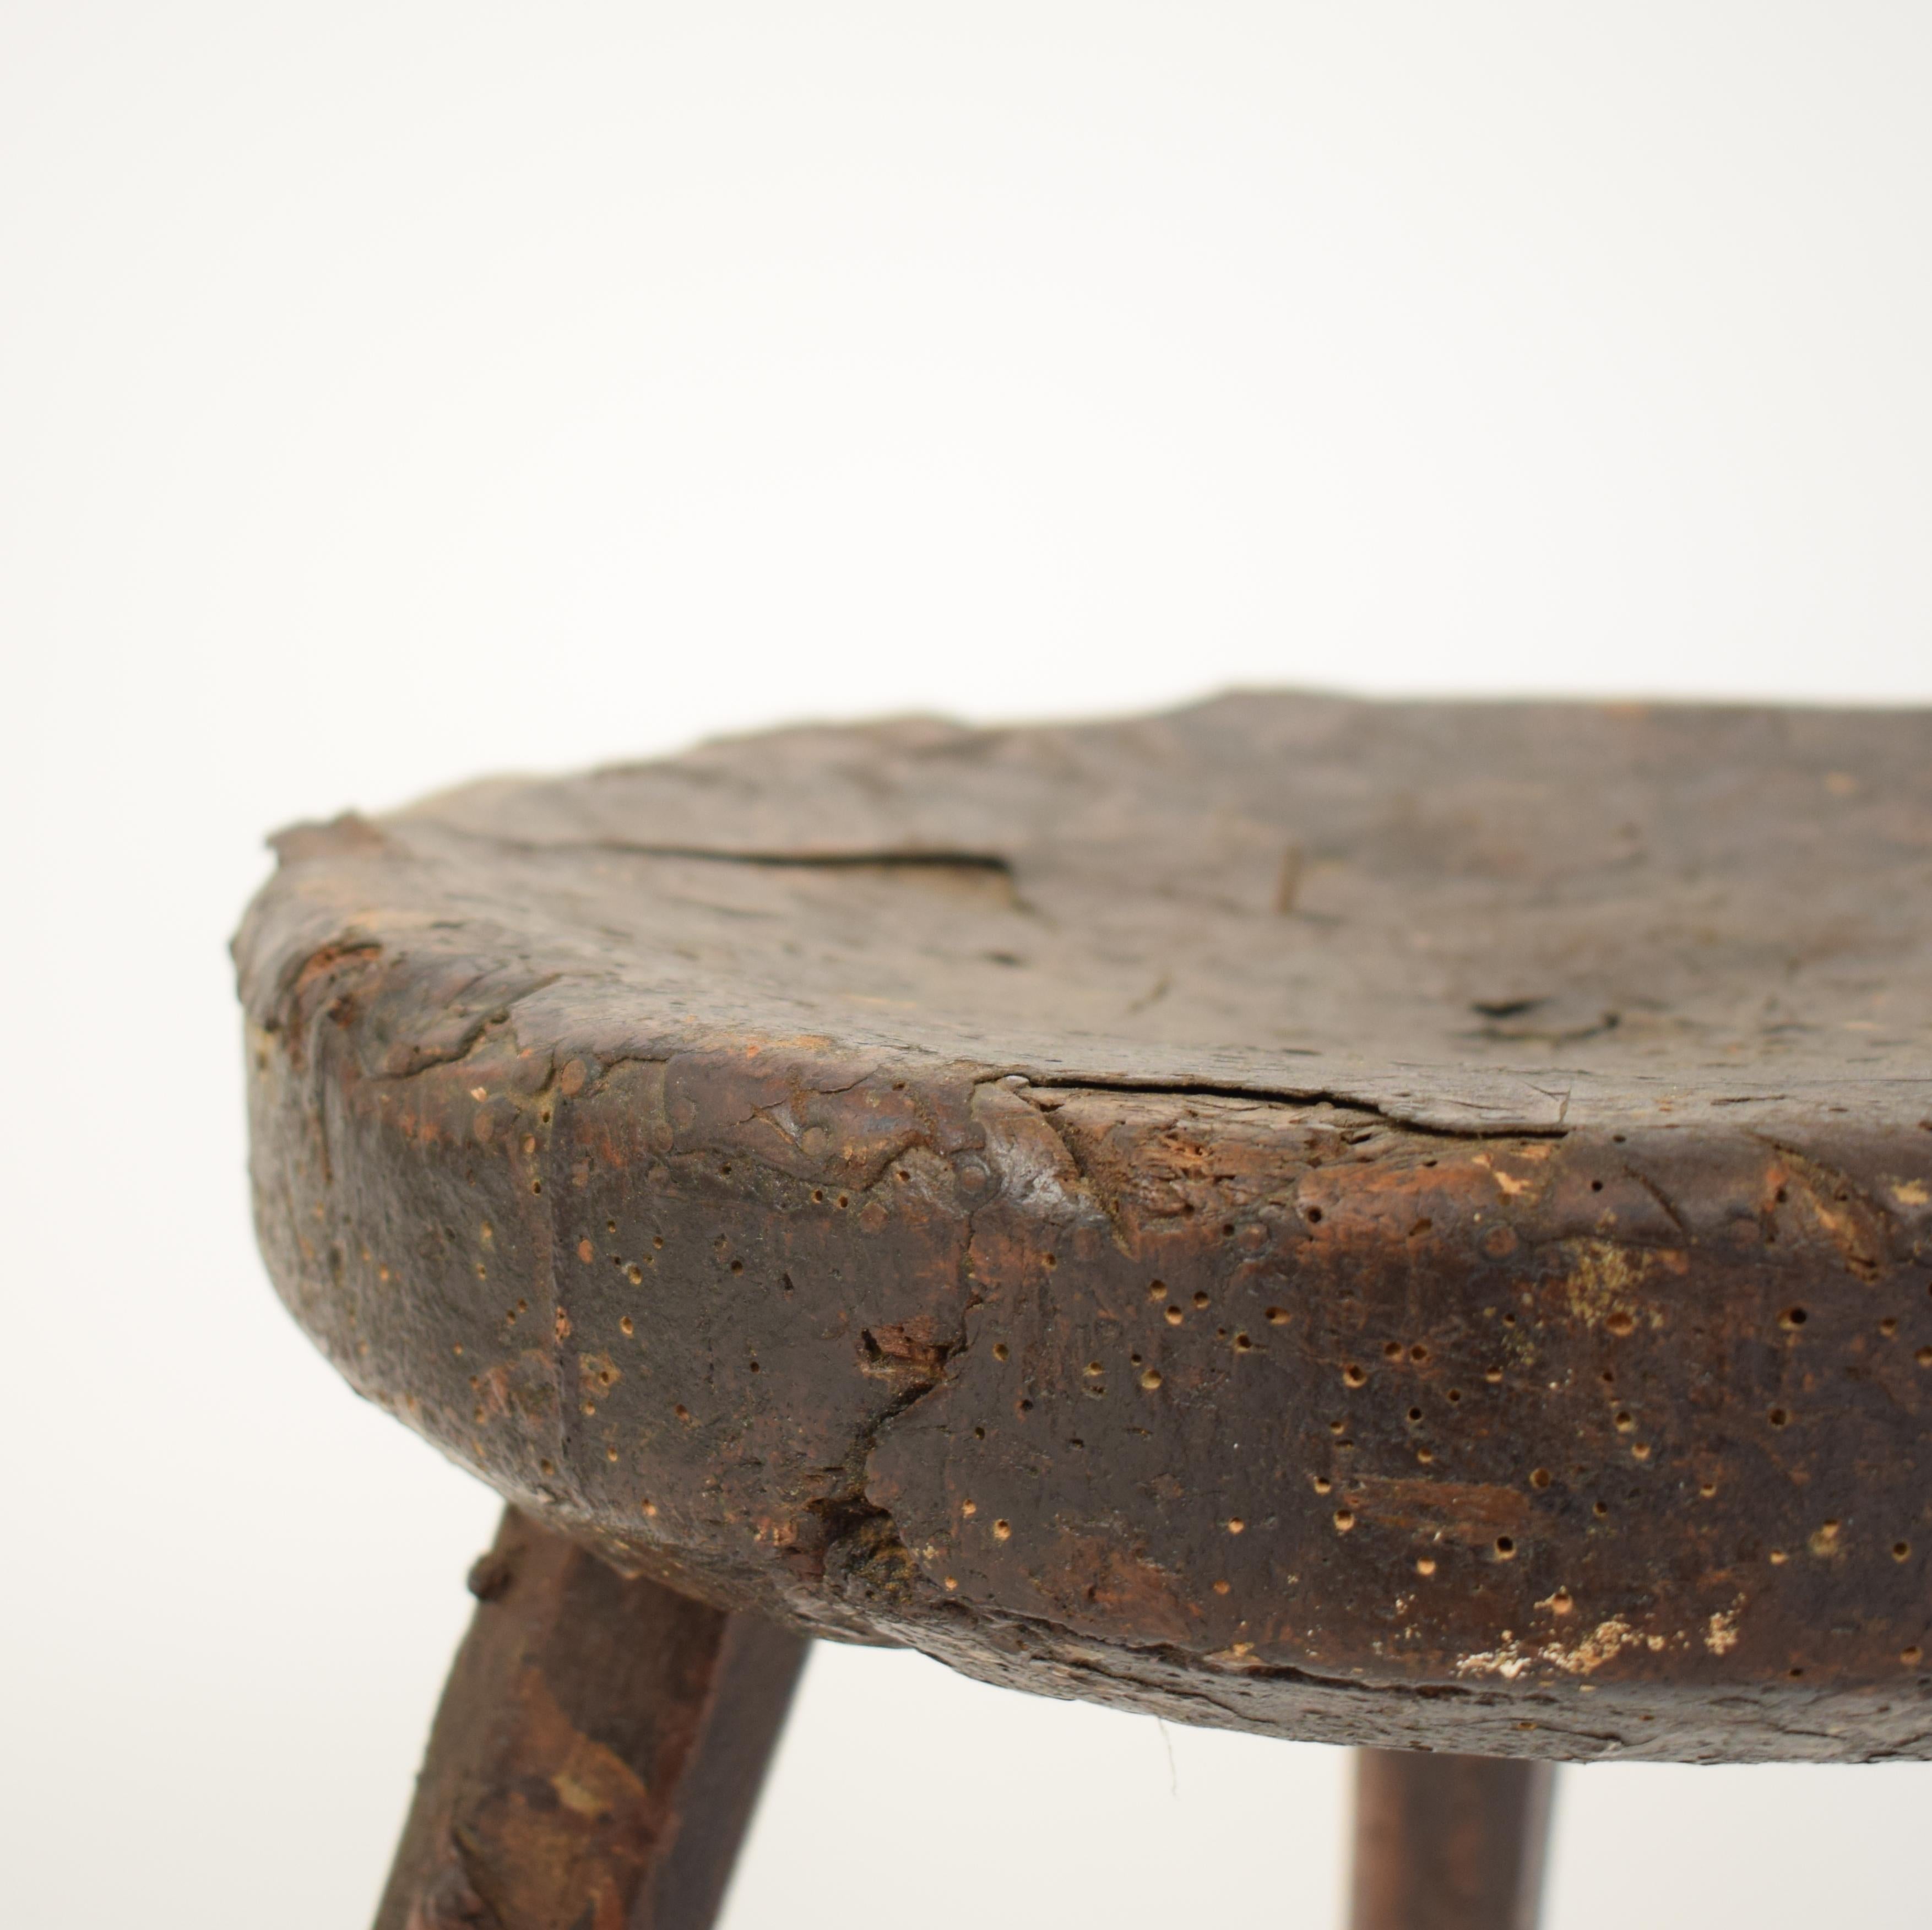 This Primitive Elm country splayed leg wood stool was made in the late 19th century, circa 1880.
It has a leather cover over the seating part.
The stool has a beautiful Patina.